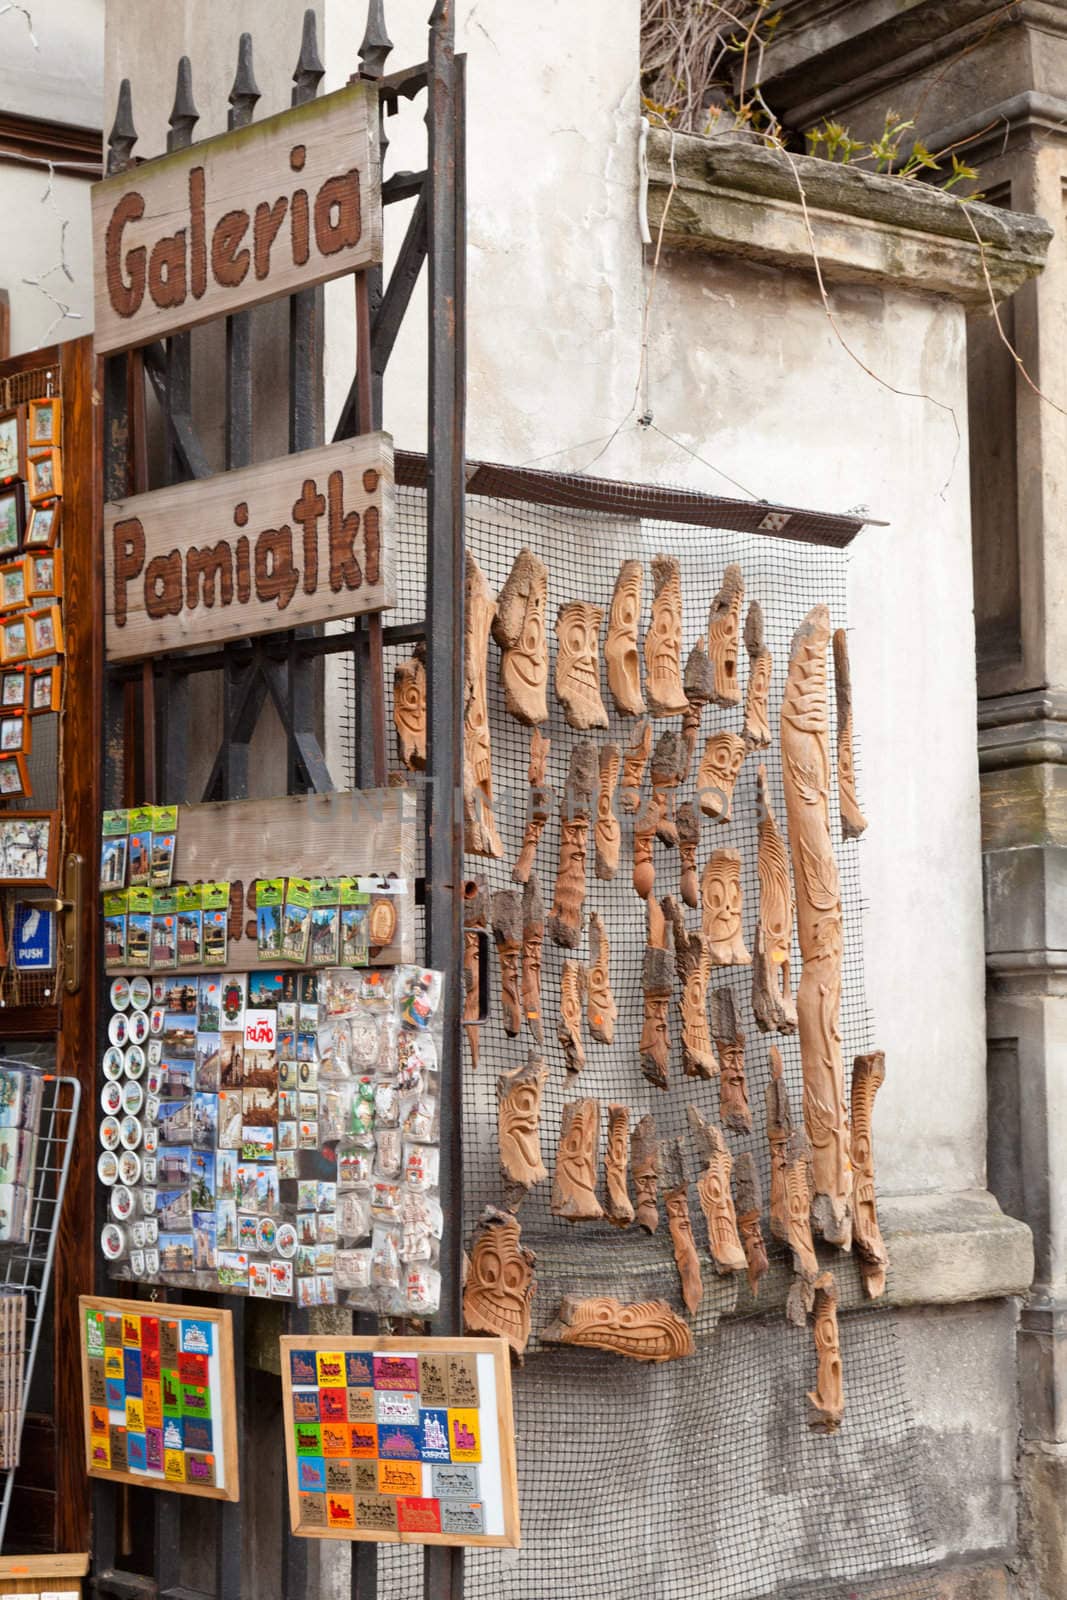 Colofulr souvenir displays on Krakow Old Town waiting for tourists.